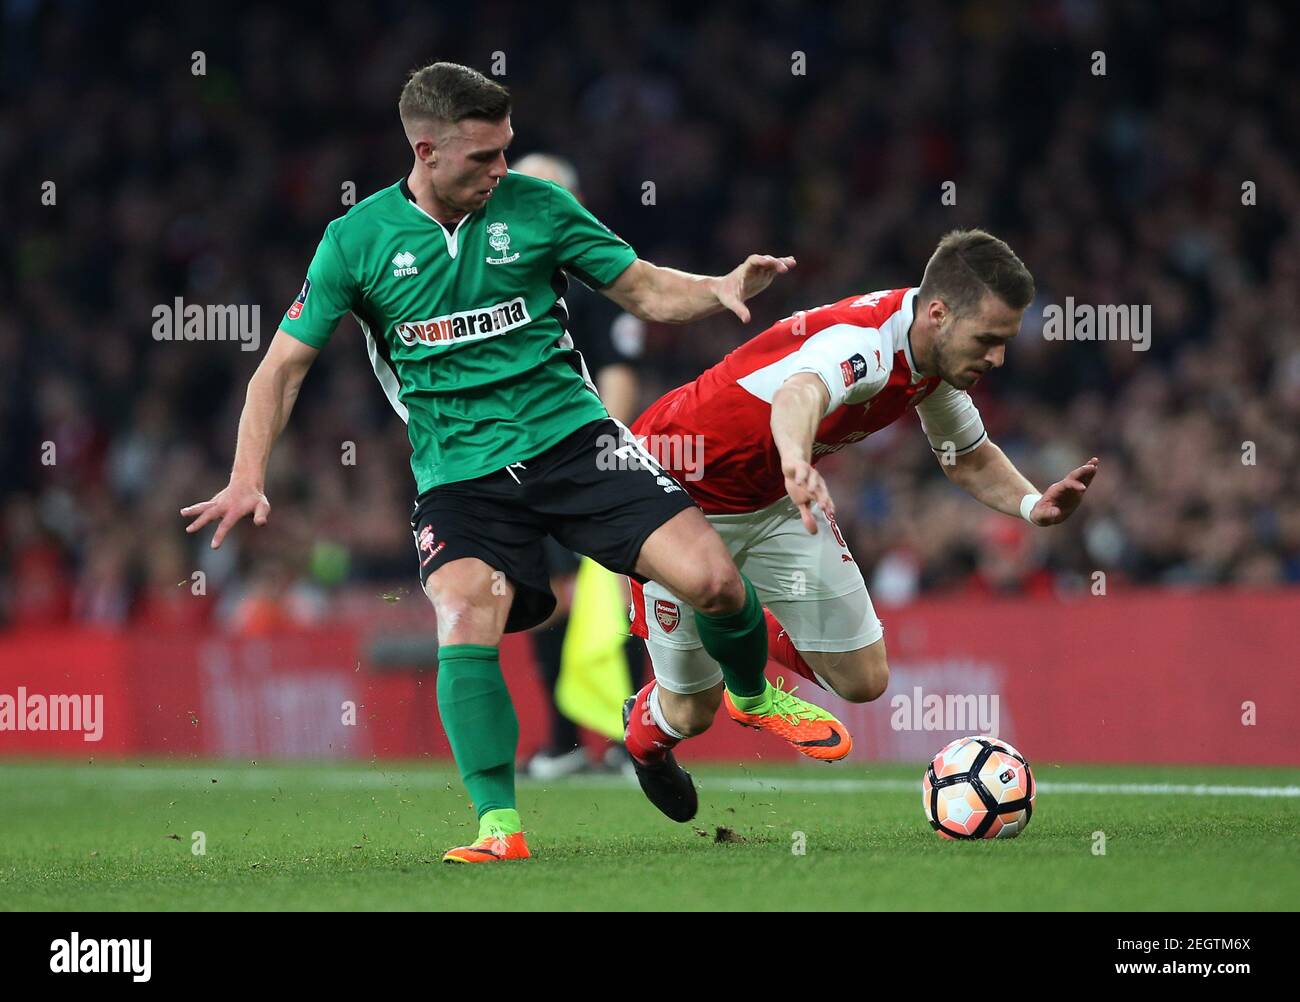 Britain Football Soccer - Arsenal v Lincoln City - FA Cup Quarter Final - The Emirates Stadium - 11/3/17 Lincoln's Jonathan Jack Muldoon  in action with Arsenal's Aaron Ramsey  Reuters / Paul Hackett Livepic EDITORIAL USE ONLY. No use with unauthorized audio, video, data, fixture lists, club/league logos or 'live' services. Online in-match use limited to 45 images, no video emulation. No use in betting, games or single club/league/player publications.  Please contact your account representative for further details. Stock Photo